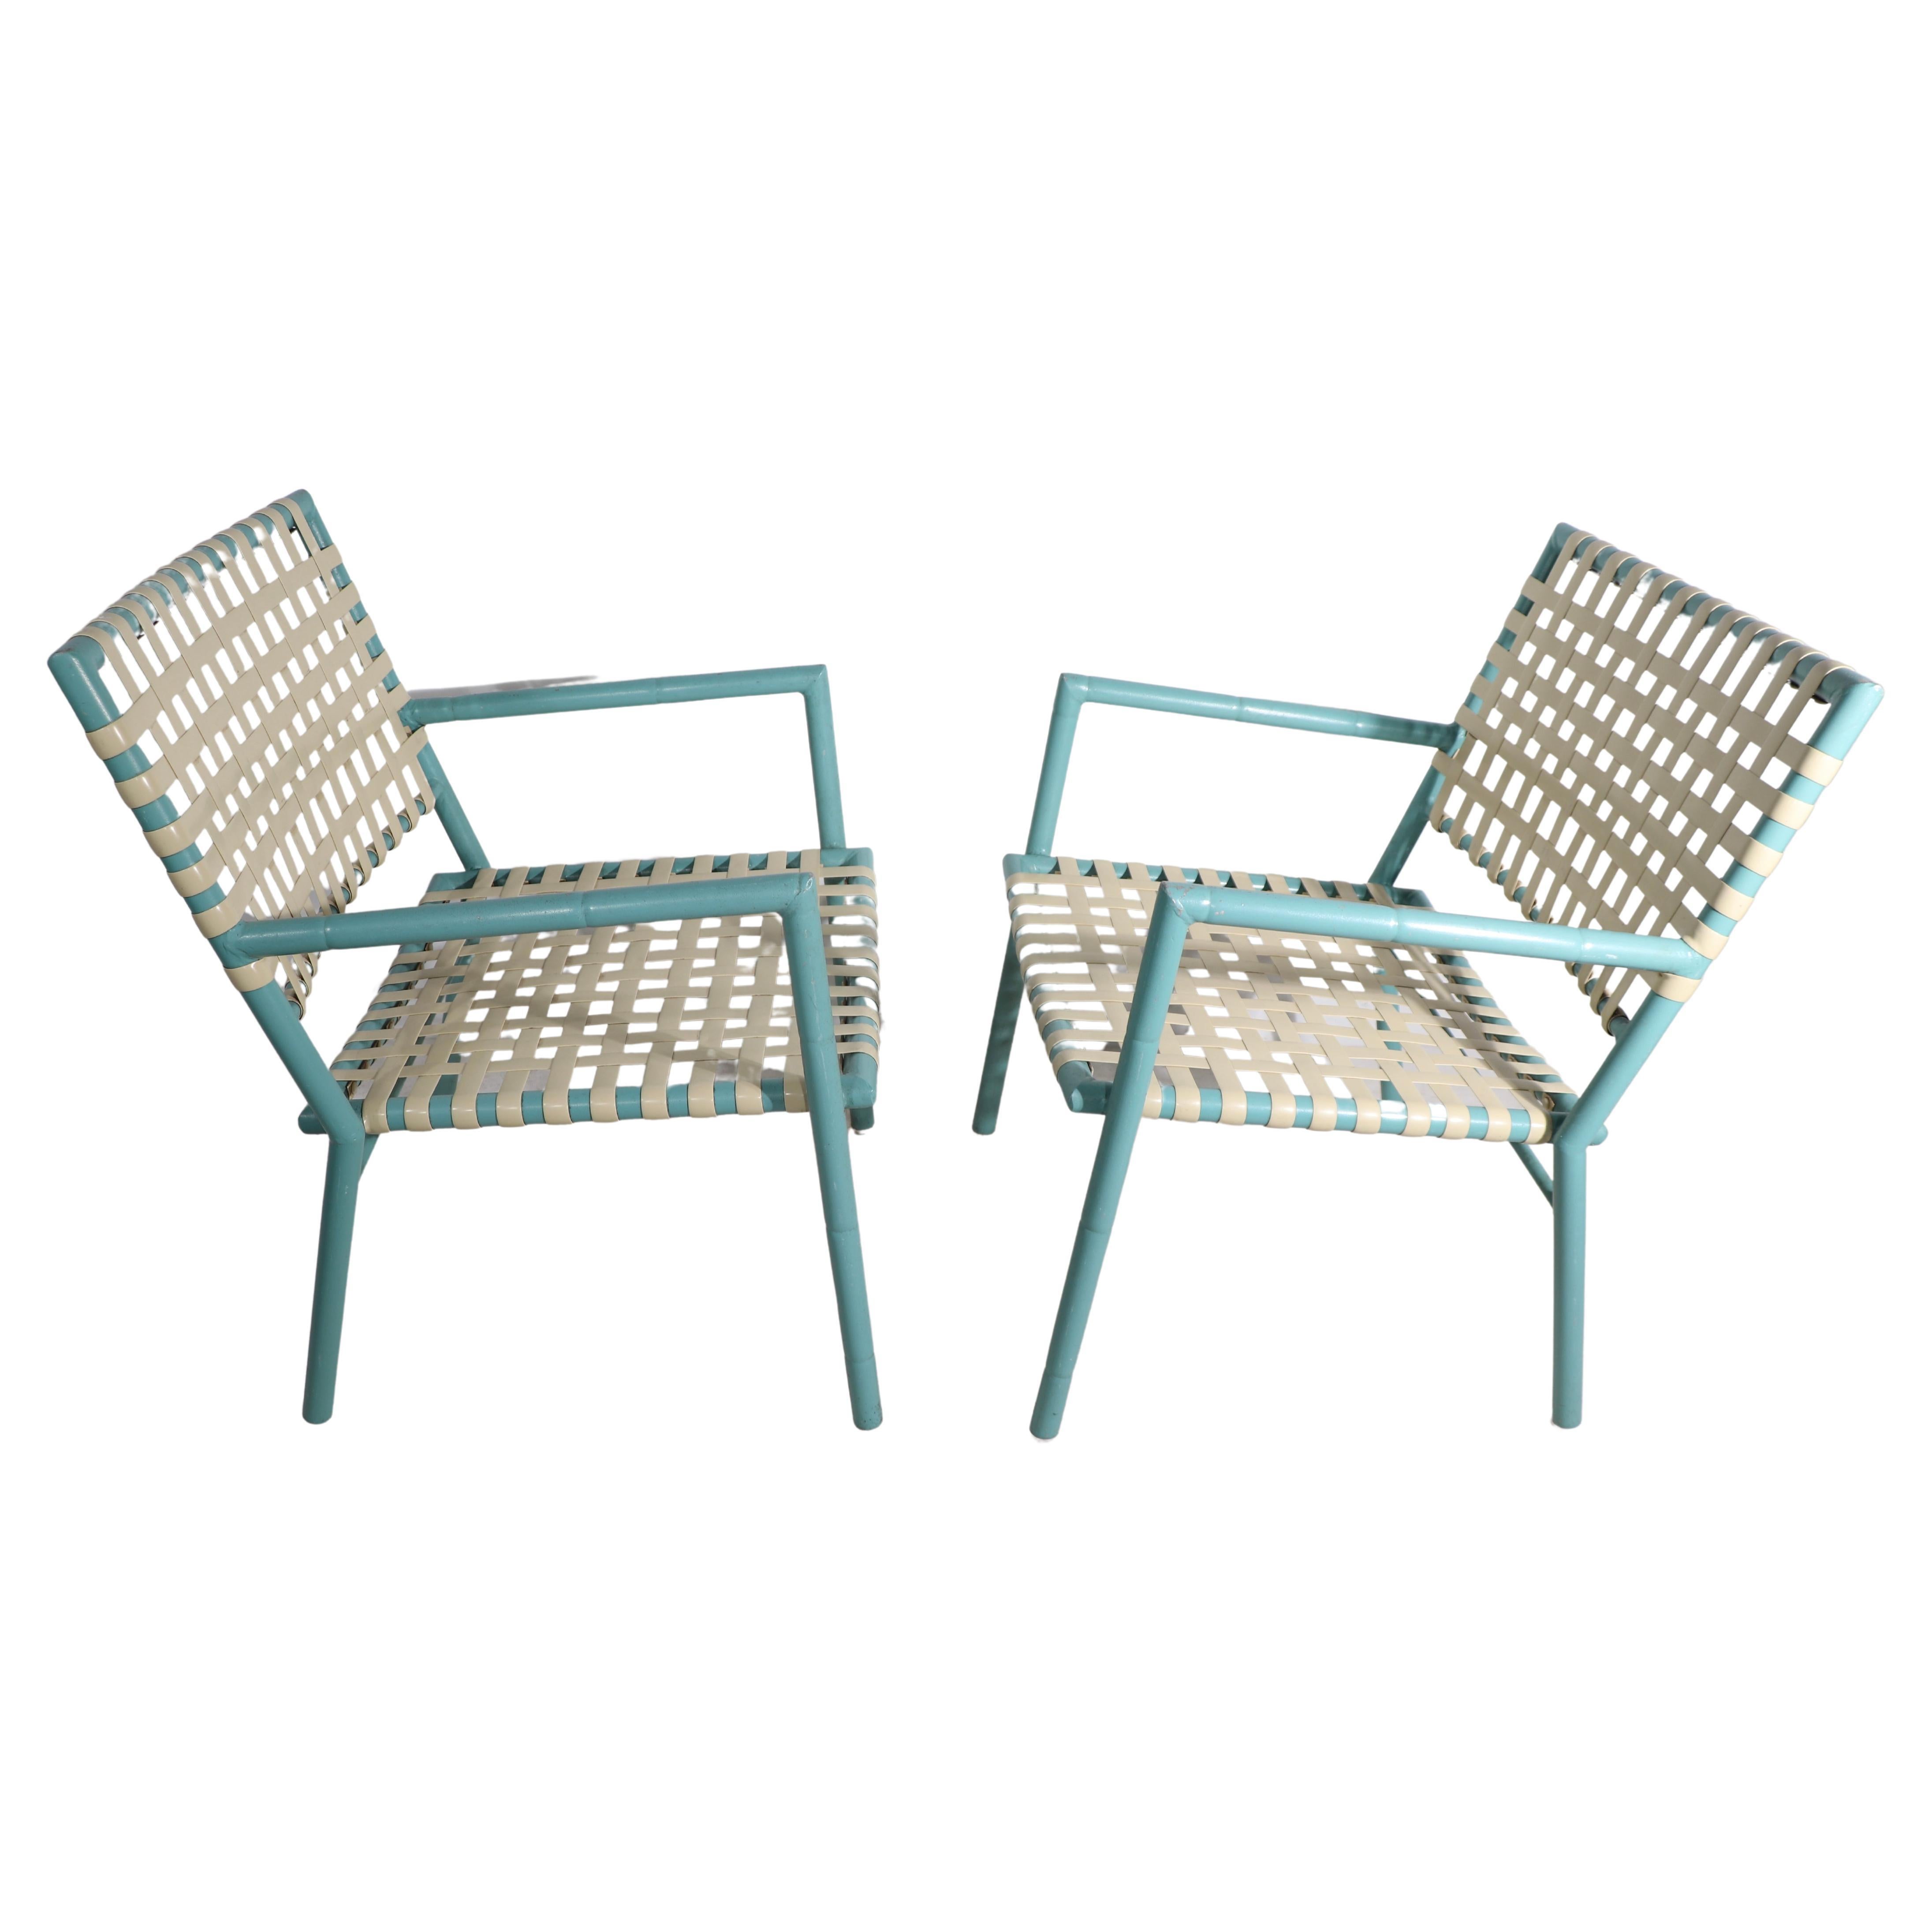 Pr. Faux Bamboo Poolside Garden Patio Lounge Chairs by Hauser ca. 1970's